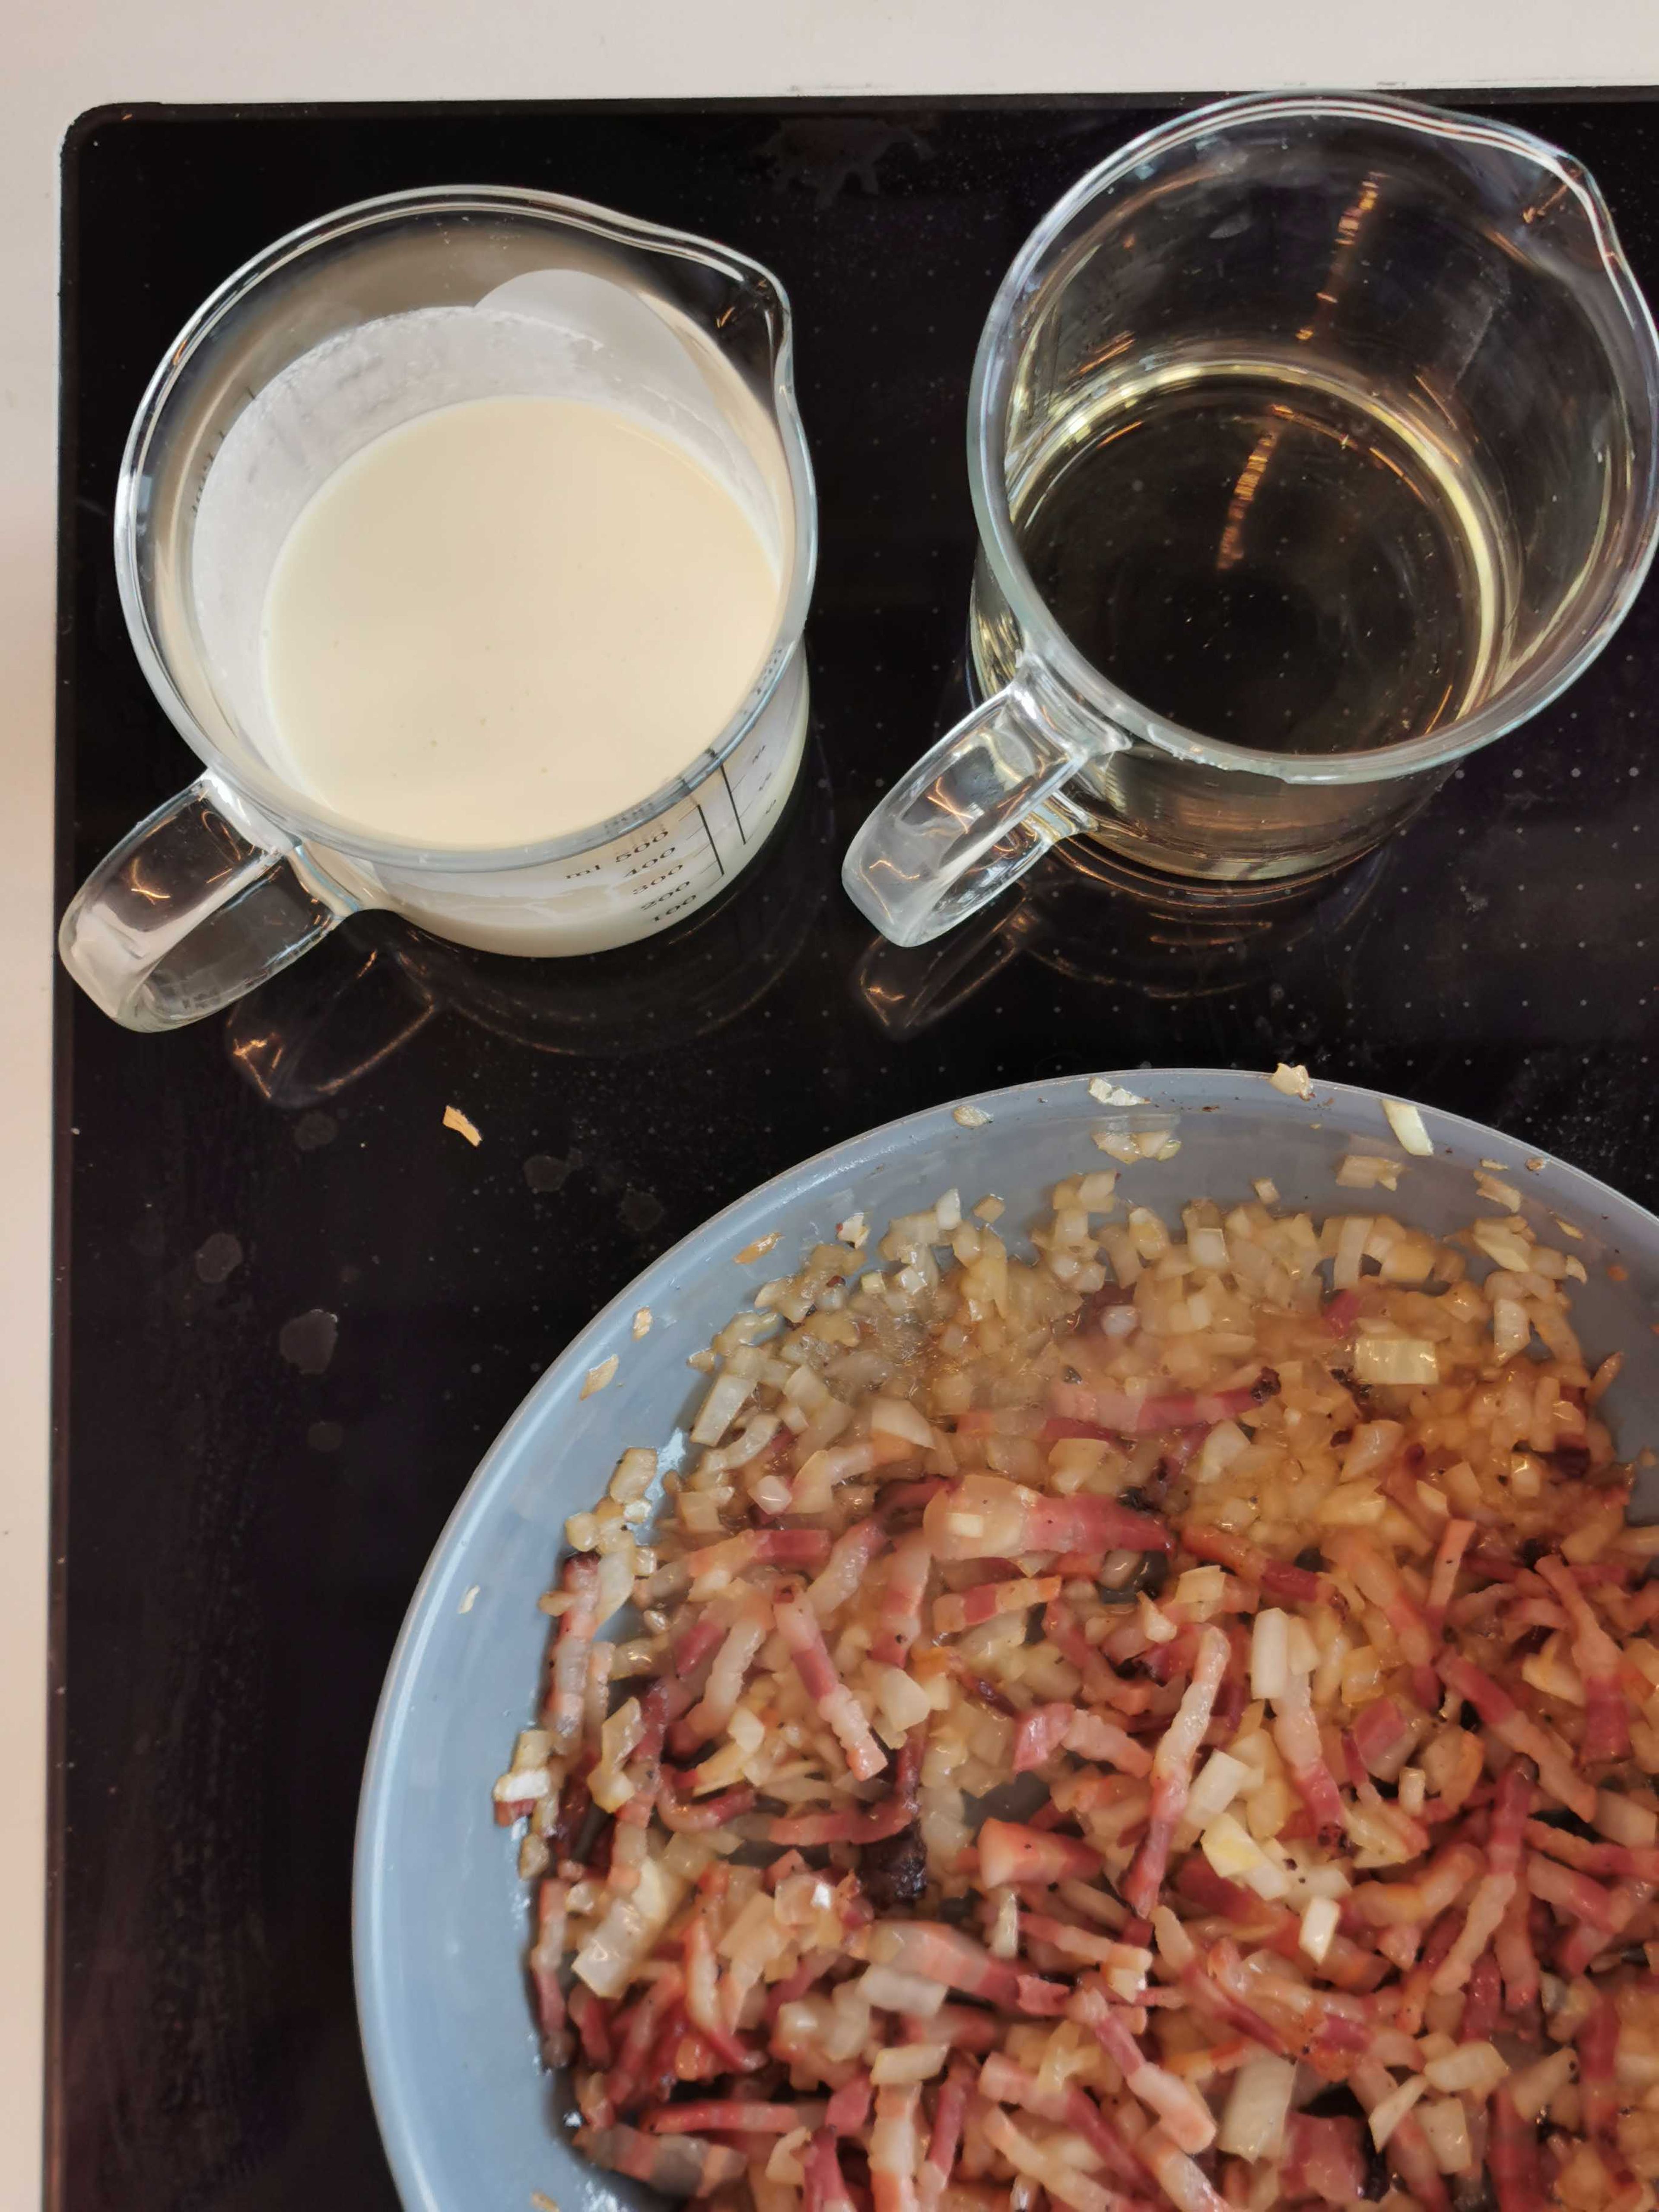 Peel and dice onions. Dice smoked bacon and fry in a pan. Slightly braise the onions in the same pan. Deglaze with heavy cream and season to taste.